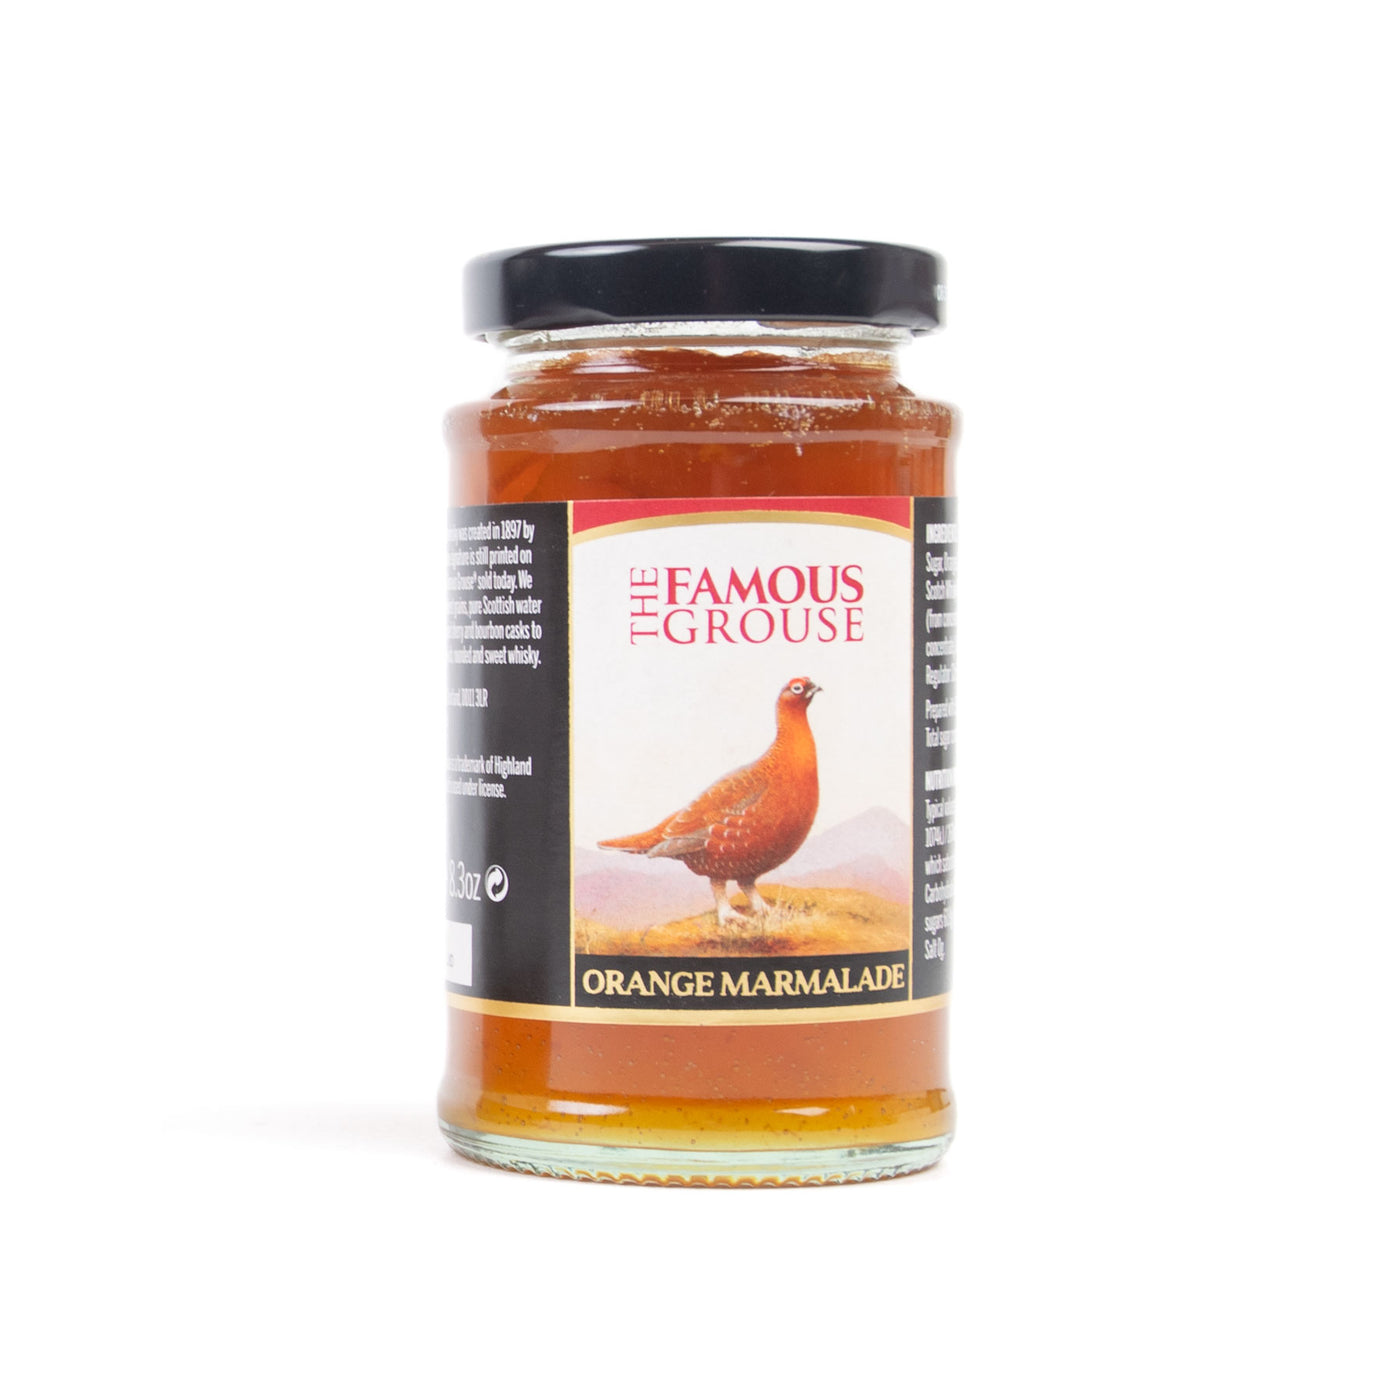 The Famous Grouse Blended Whisky Marmalade